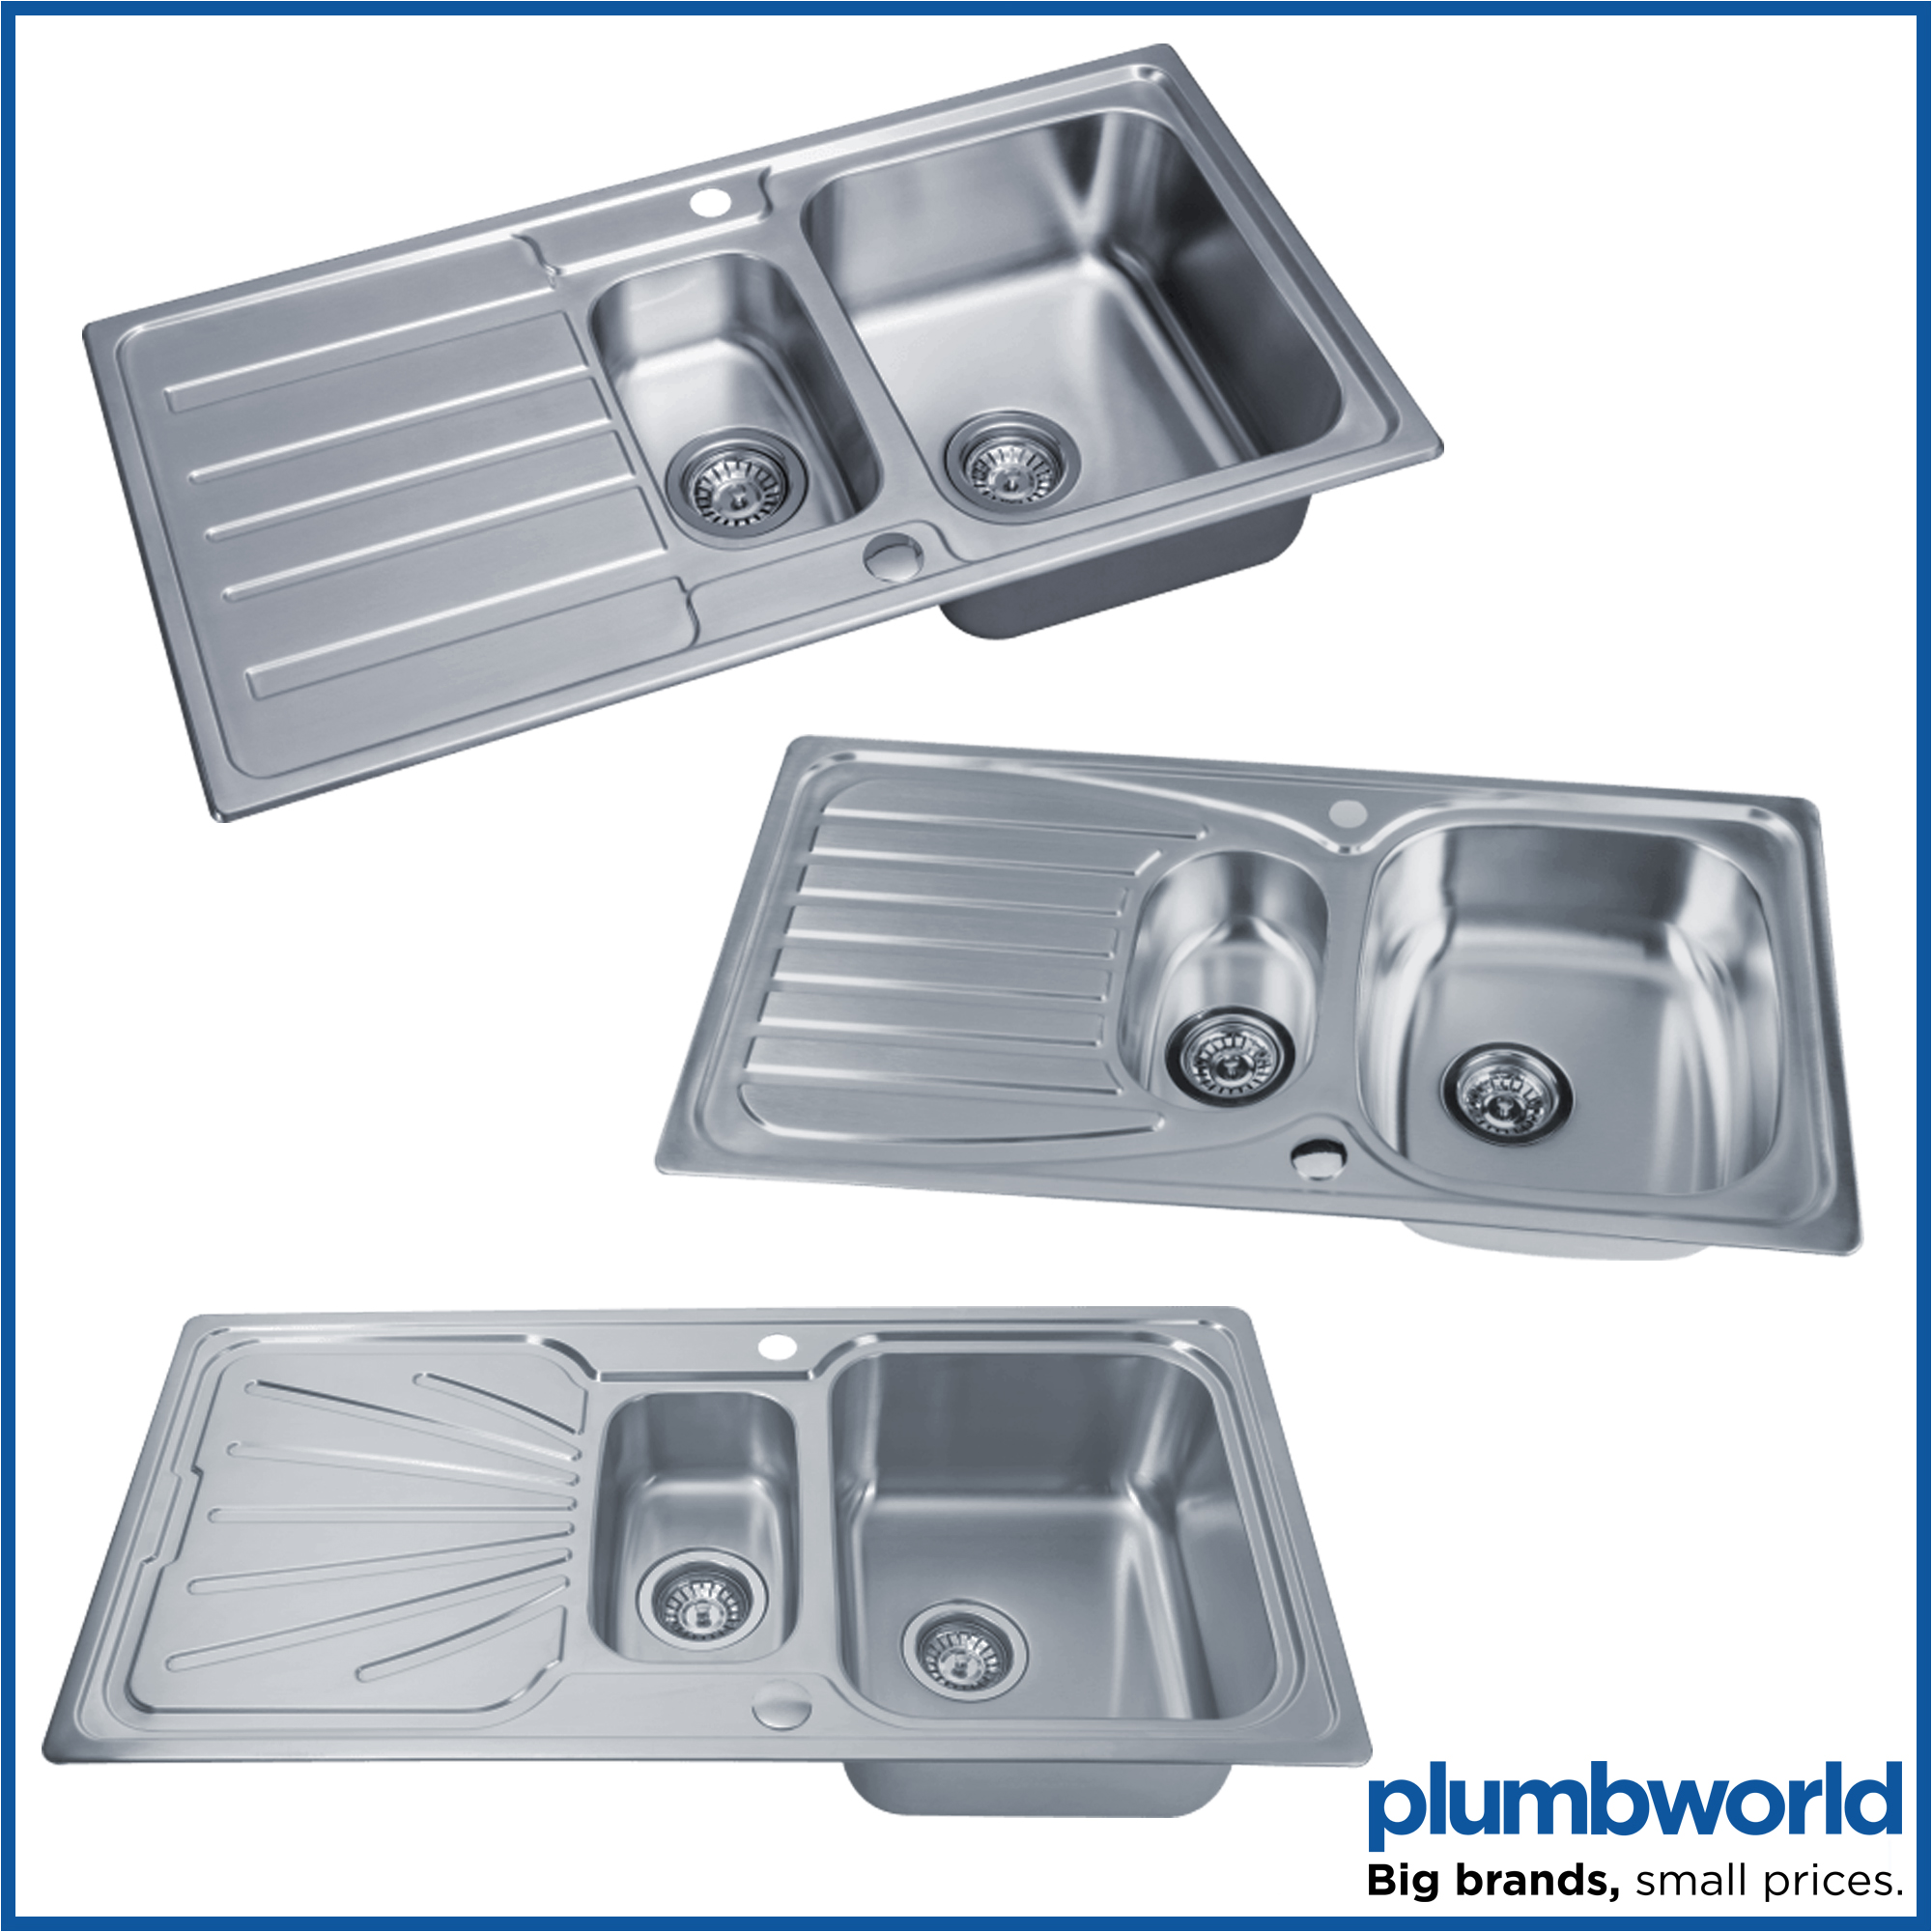 Details About Modern Stainless Steel Inset Kitchen Sink Various Styles 1 5 Single Bowl Waste